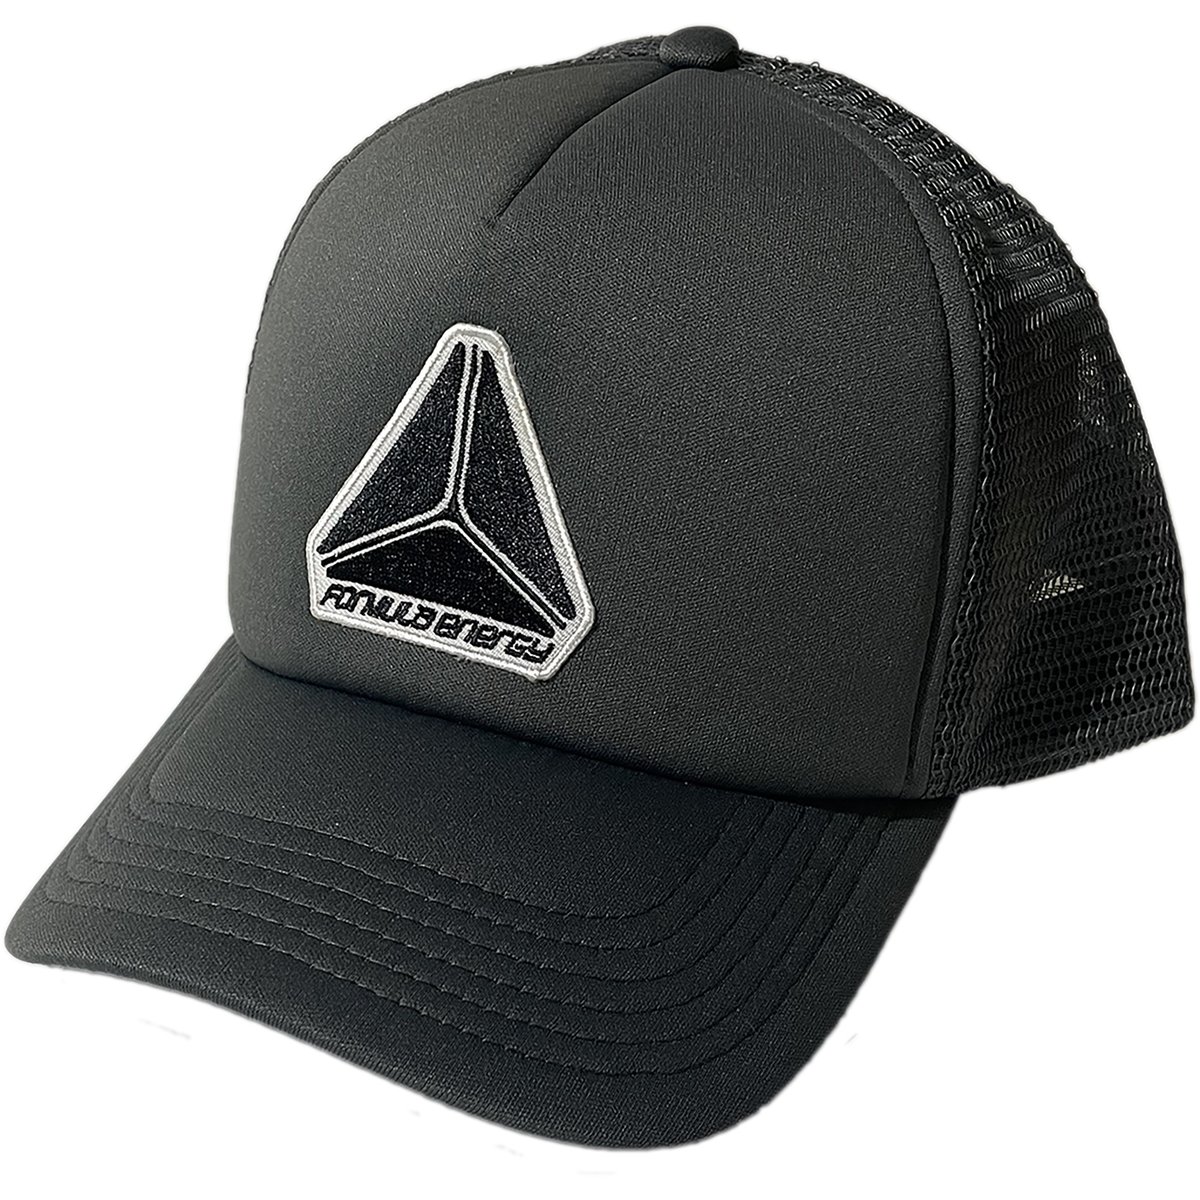 Our new truckers caps just arrived , check them out  . Black or Grey with logo front and centre. 
formulaenergy.com.au/collections/ac…
#new #caps #apparel #shoponline #surfwear